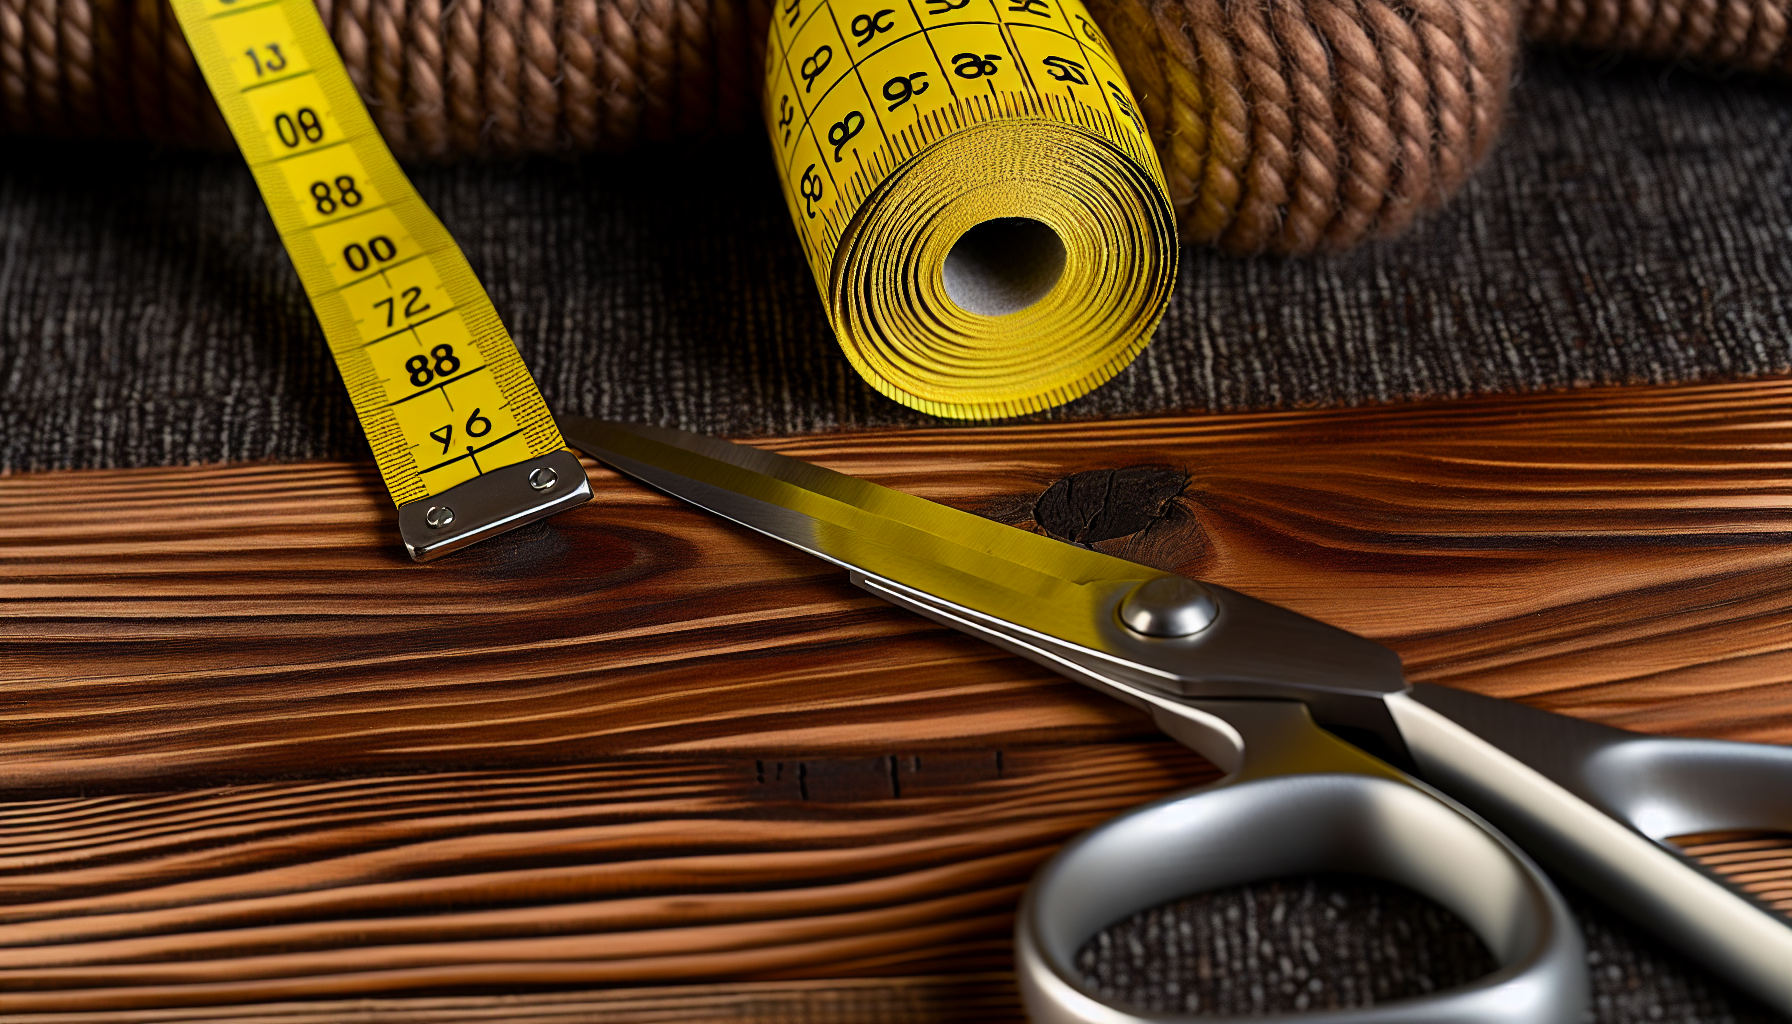 Measuring tape and scissors on a wooden surface for preparing rug pads and cutting runners